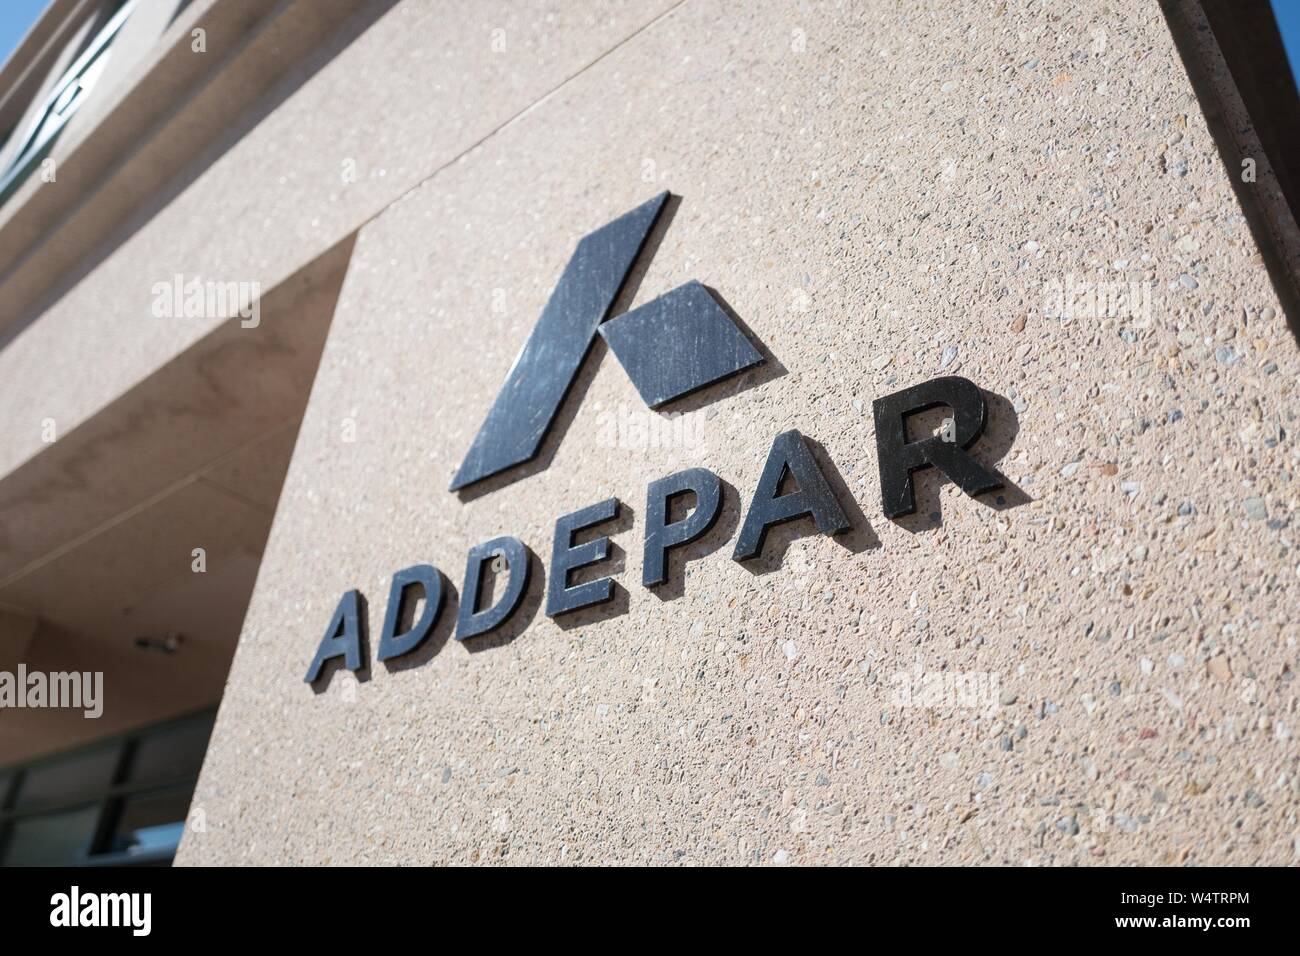 Close-up of logo for cloud financial management technology company Addepar in the Silicon Valley town of Mountain View, California, October 28, 2018. () Stock Photo